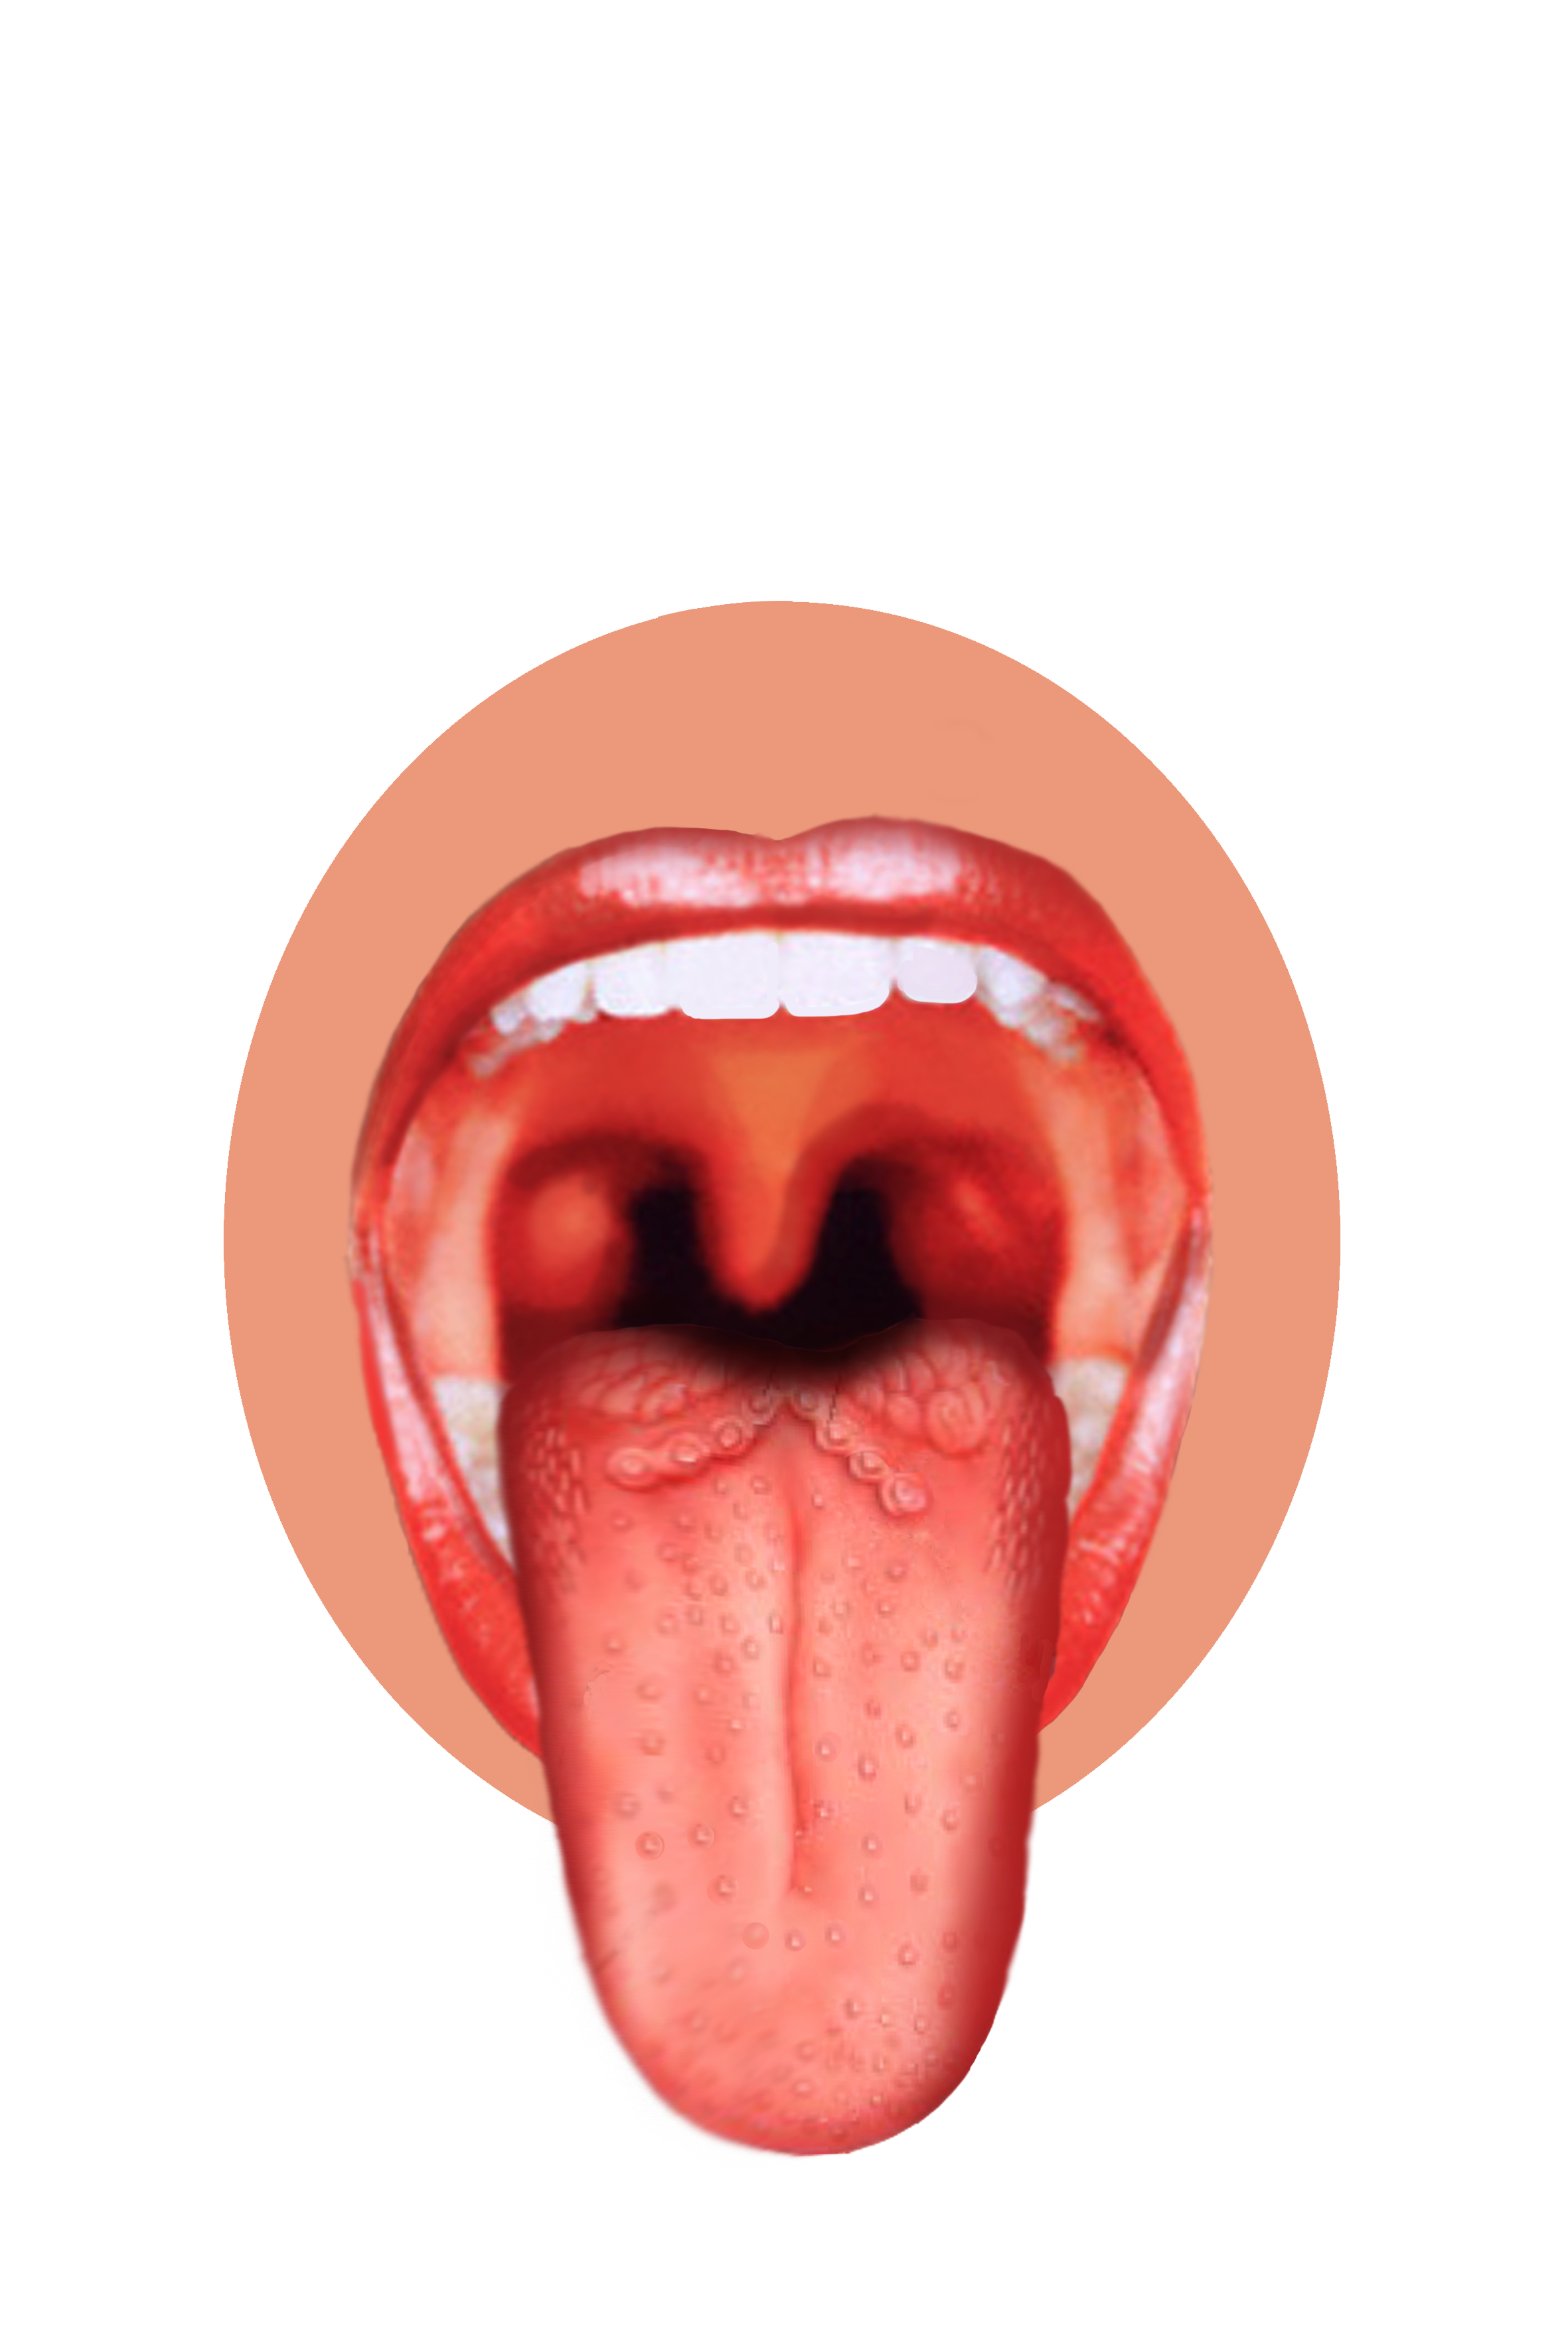 The Tongue Patch Diet | Hungarian Dentist in London